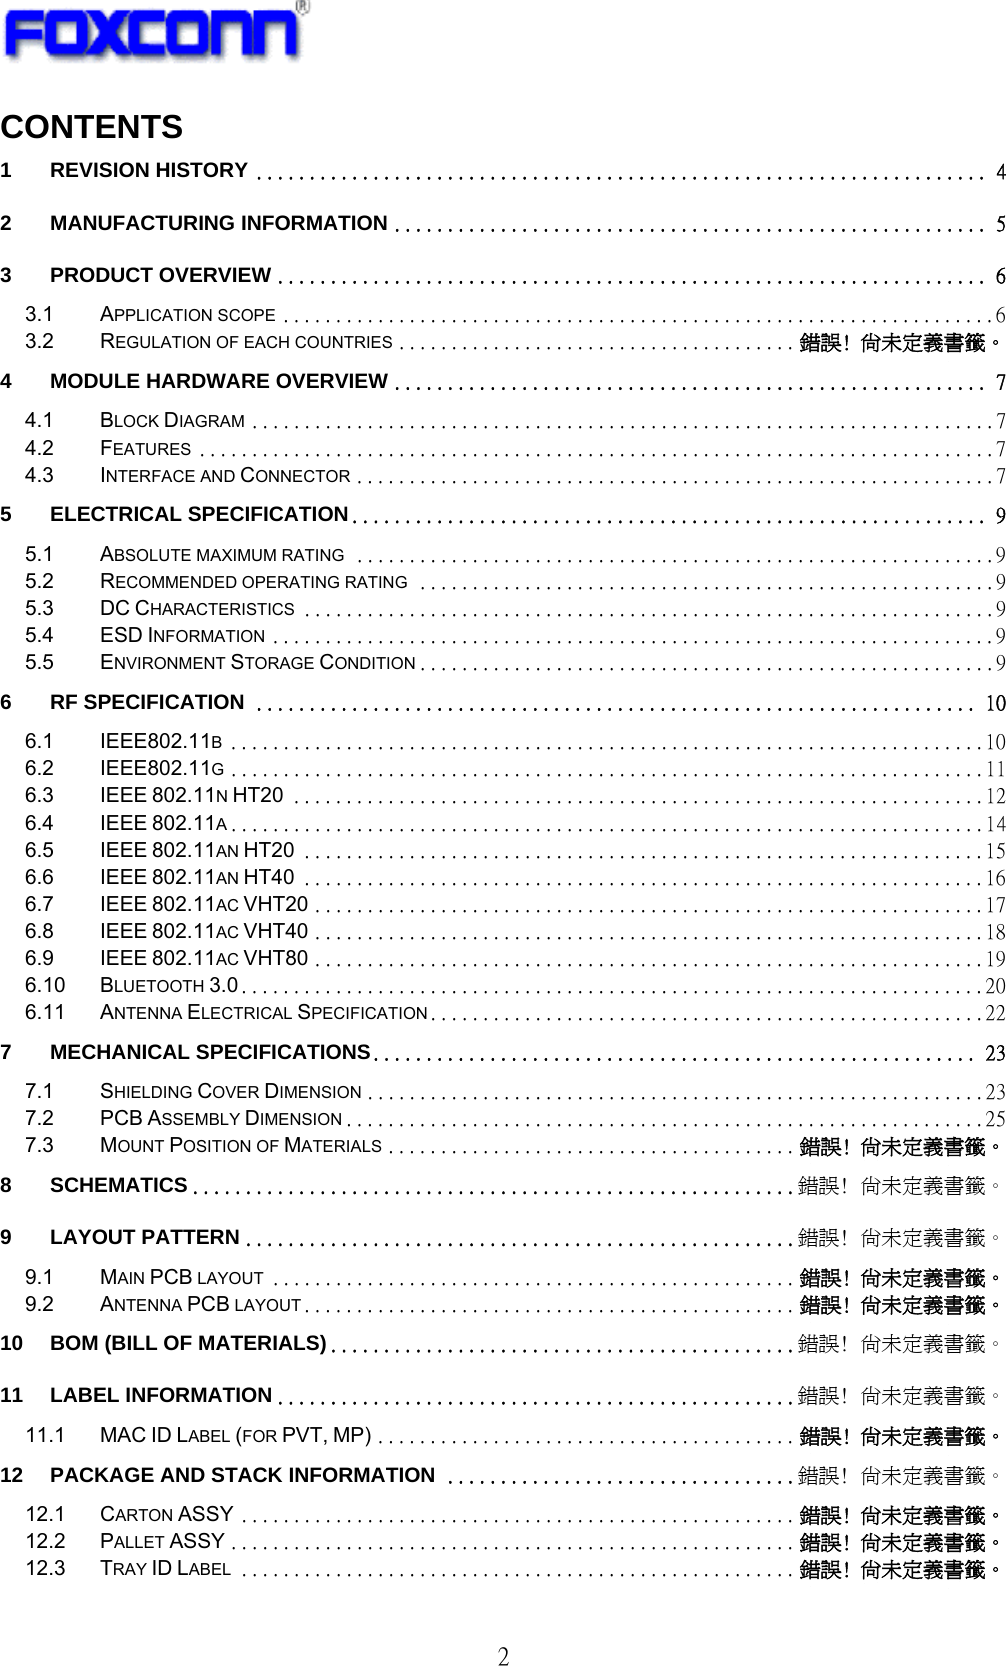   2 CONTENTS 1 REVISION HISTORY ..................................................................... 4 2 MANUFACTURING INFORMATION ........................................................ 5 3 PRODUCT OVERVIEW ................................................................... 6 3.1 APPLICATION SCOPE .................................................................... 6 3.2 REGULATION OF EACH COUNTRIES ...................................... 錯誤! 尚未定義書籤。 4 MODULE HARDWARE OVERVIEW ........................................................ 7 4.1 BLOCK DIAGRAM ....................................................................... 7 4.2 FEATURES ............................................................................ 7 4.3 INTERFACE AND CONNECTOR ............................................................. 7 5 ELECTRICAL SPECIFICATION ............................................................ 9 5.1 ABSOLUTE MAXIMUM RATING ............................................................. 9 5.2 RECOMMENDED OPERATING RATING ....................................................... 9 5.3 DC CHARACTERISTICS .................................................................. 9 5.4 ESD INFORMATION ..................................................................... 9 5.5 ENVIRONMENT STORAGE CONDITION ....................................................... 9 6 RF SPECIFICATION .................................................................... 10 6.1 IEEE802.11B ........................................................................ 10 6.2 IEEE802.11G ........................................................................ 11 6.3 IEEE 802.11N HT20 .................................................................. 12 6.4 IEEE 802.11A ........................................................................ 14 6.5 IEEE 802.11AN HT20 ................................................................. 15 6.6 IEEE 802.11AN HT40 ................................................................. 16 6.7 IEEE 802.11AC VHT20 ................................................................ 17 6.8 IEEE 802.11AC VHT40 ................................................................ 18 6.9 IEEE 802.11AC VHT80 ................................................................ 19 6.10 BLUETOOTH 3.0 ....................................................................... 20 6.11 ANTENNA ELECTRICAL SPECIFICATION..................................................... 22 7 MECHANICAL SPECIFICATIONS......................................................... 23 7.1 SHIELDING COVER DIMENSION ........................................................... 23 7.2 PCB ASSEMBLY DIMENSION ............................................................. 25 7.3 MOUNT POSITION OF MATERIALS ....................................... 錯誤! 尚未定義書籤。 8 SCHEMATICS ......................................................... 錯誤! 尚未定義書籤。 9 LAYOUT PATTERN .................................................... 錯誤! 尚未定義書籤。 9.1 MAIN PCB LAYOUT .................................................. 錯誤! 尚未定義書籤。 9.2 ANTENNA PCB LAYOUT ............................................... 錯誤! 尚未定義書籤。 10 BOM (BILL OF MATERIALS) ............................................ 錯誤! 尚未定義書籤。 11 LABEL INFORMATION ................................................. 錯誤! 尚未定義書籤。 11.1 MAC ID LABEL (FOR PVT, MP) ........................................ 錯誤! 尚未定義書籤。 12 PACKAGE AND STACK INFORMATION ................................. 錯誤! 尚未定義書籤。 12.1 CARTON ASSY ..................................................... 錯誤! 尚未定義書籤。 12.2 PALLET ASSY ...................................................... 錯誤! 尚未定義書籤。 12.3 TRAY ID LABEL ..................................................... 錯誤! 尚未定義書籤。 